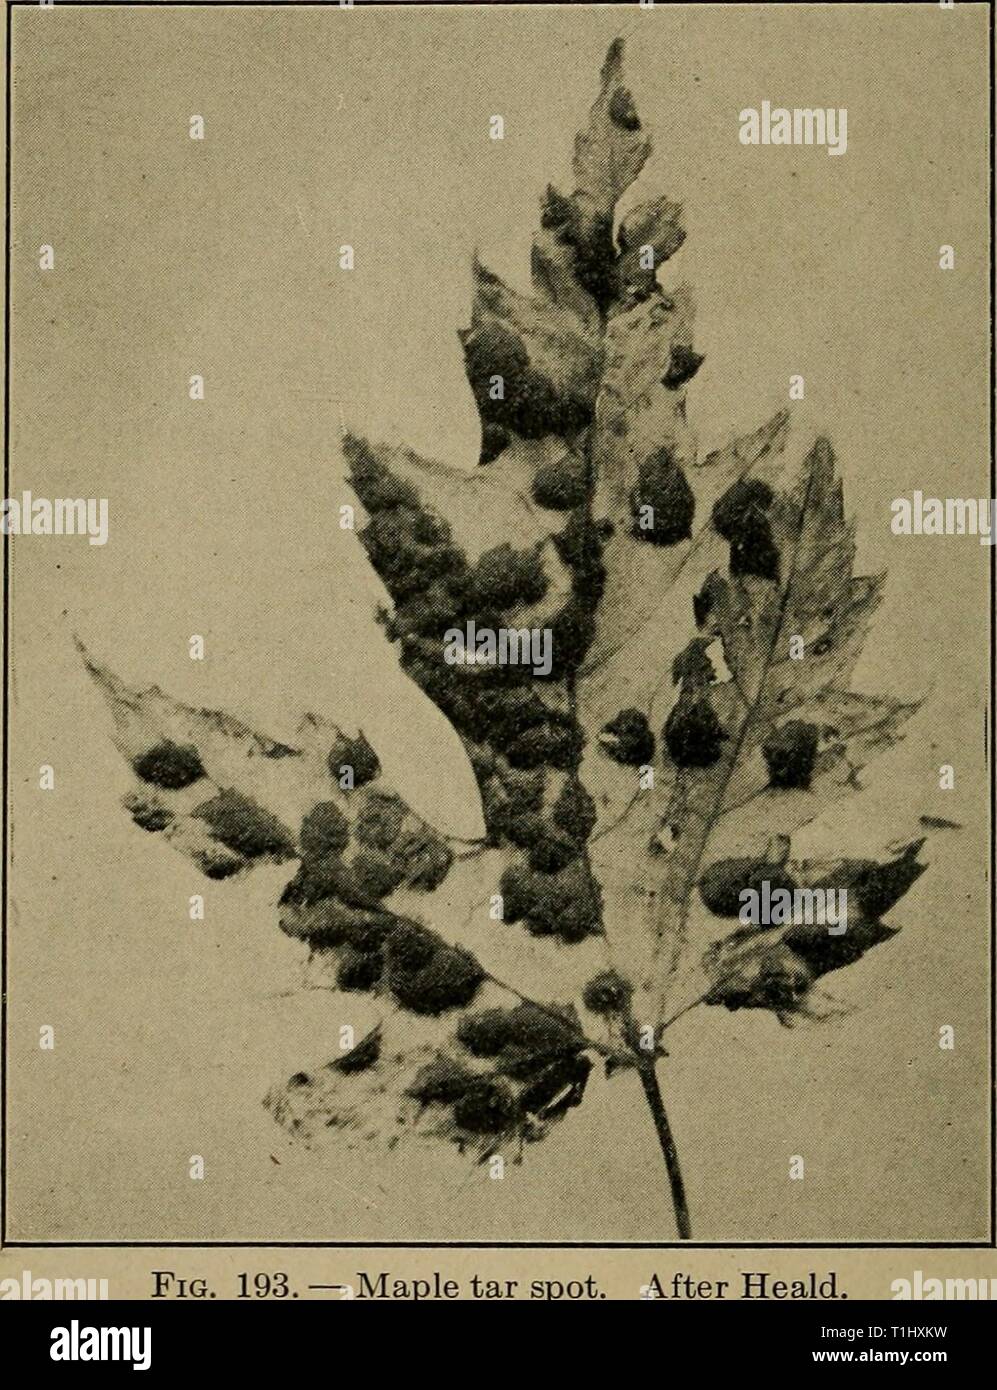 Diseases of economic plants (1910) Diseases of economic plants  diseasesofeconom02stev Year: 1910  442 DISEASES OF ECONOMIC PLANTS MAPLE Leaf spot, phyllostictose (Phyllosticta acericola C. & E.).— A large proportion of the leaf may become involved, causing premature defoliation which materially lessens the    Maple tar spot. After Heald. value of the tree for ornament or shade. The silver maples are especially susceptible, and their sale has thereby been reduced. The leaf spot was first noted in 1874 and is dis- tributed throughout the United States. The blackish, sub circular spots as they e Stock Photo